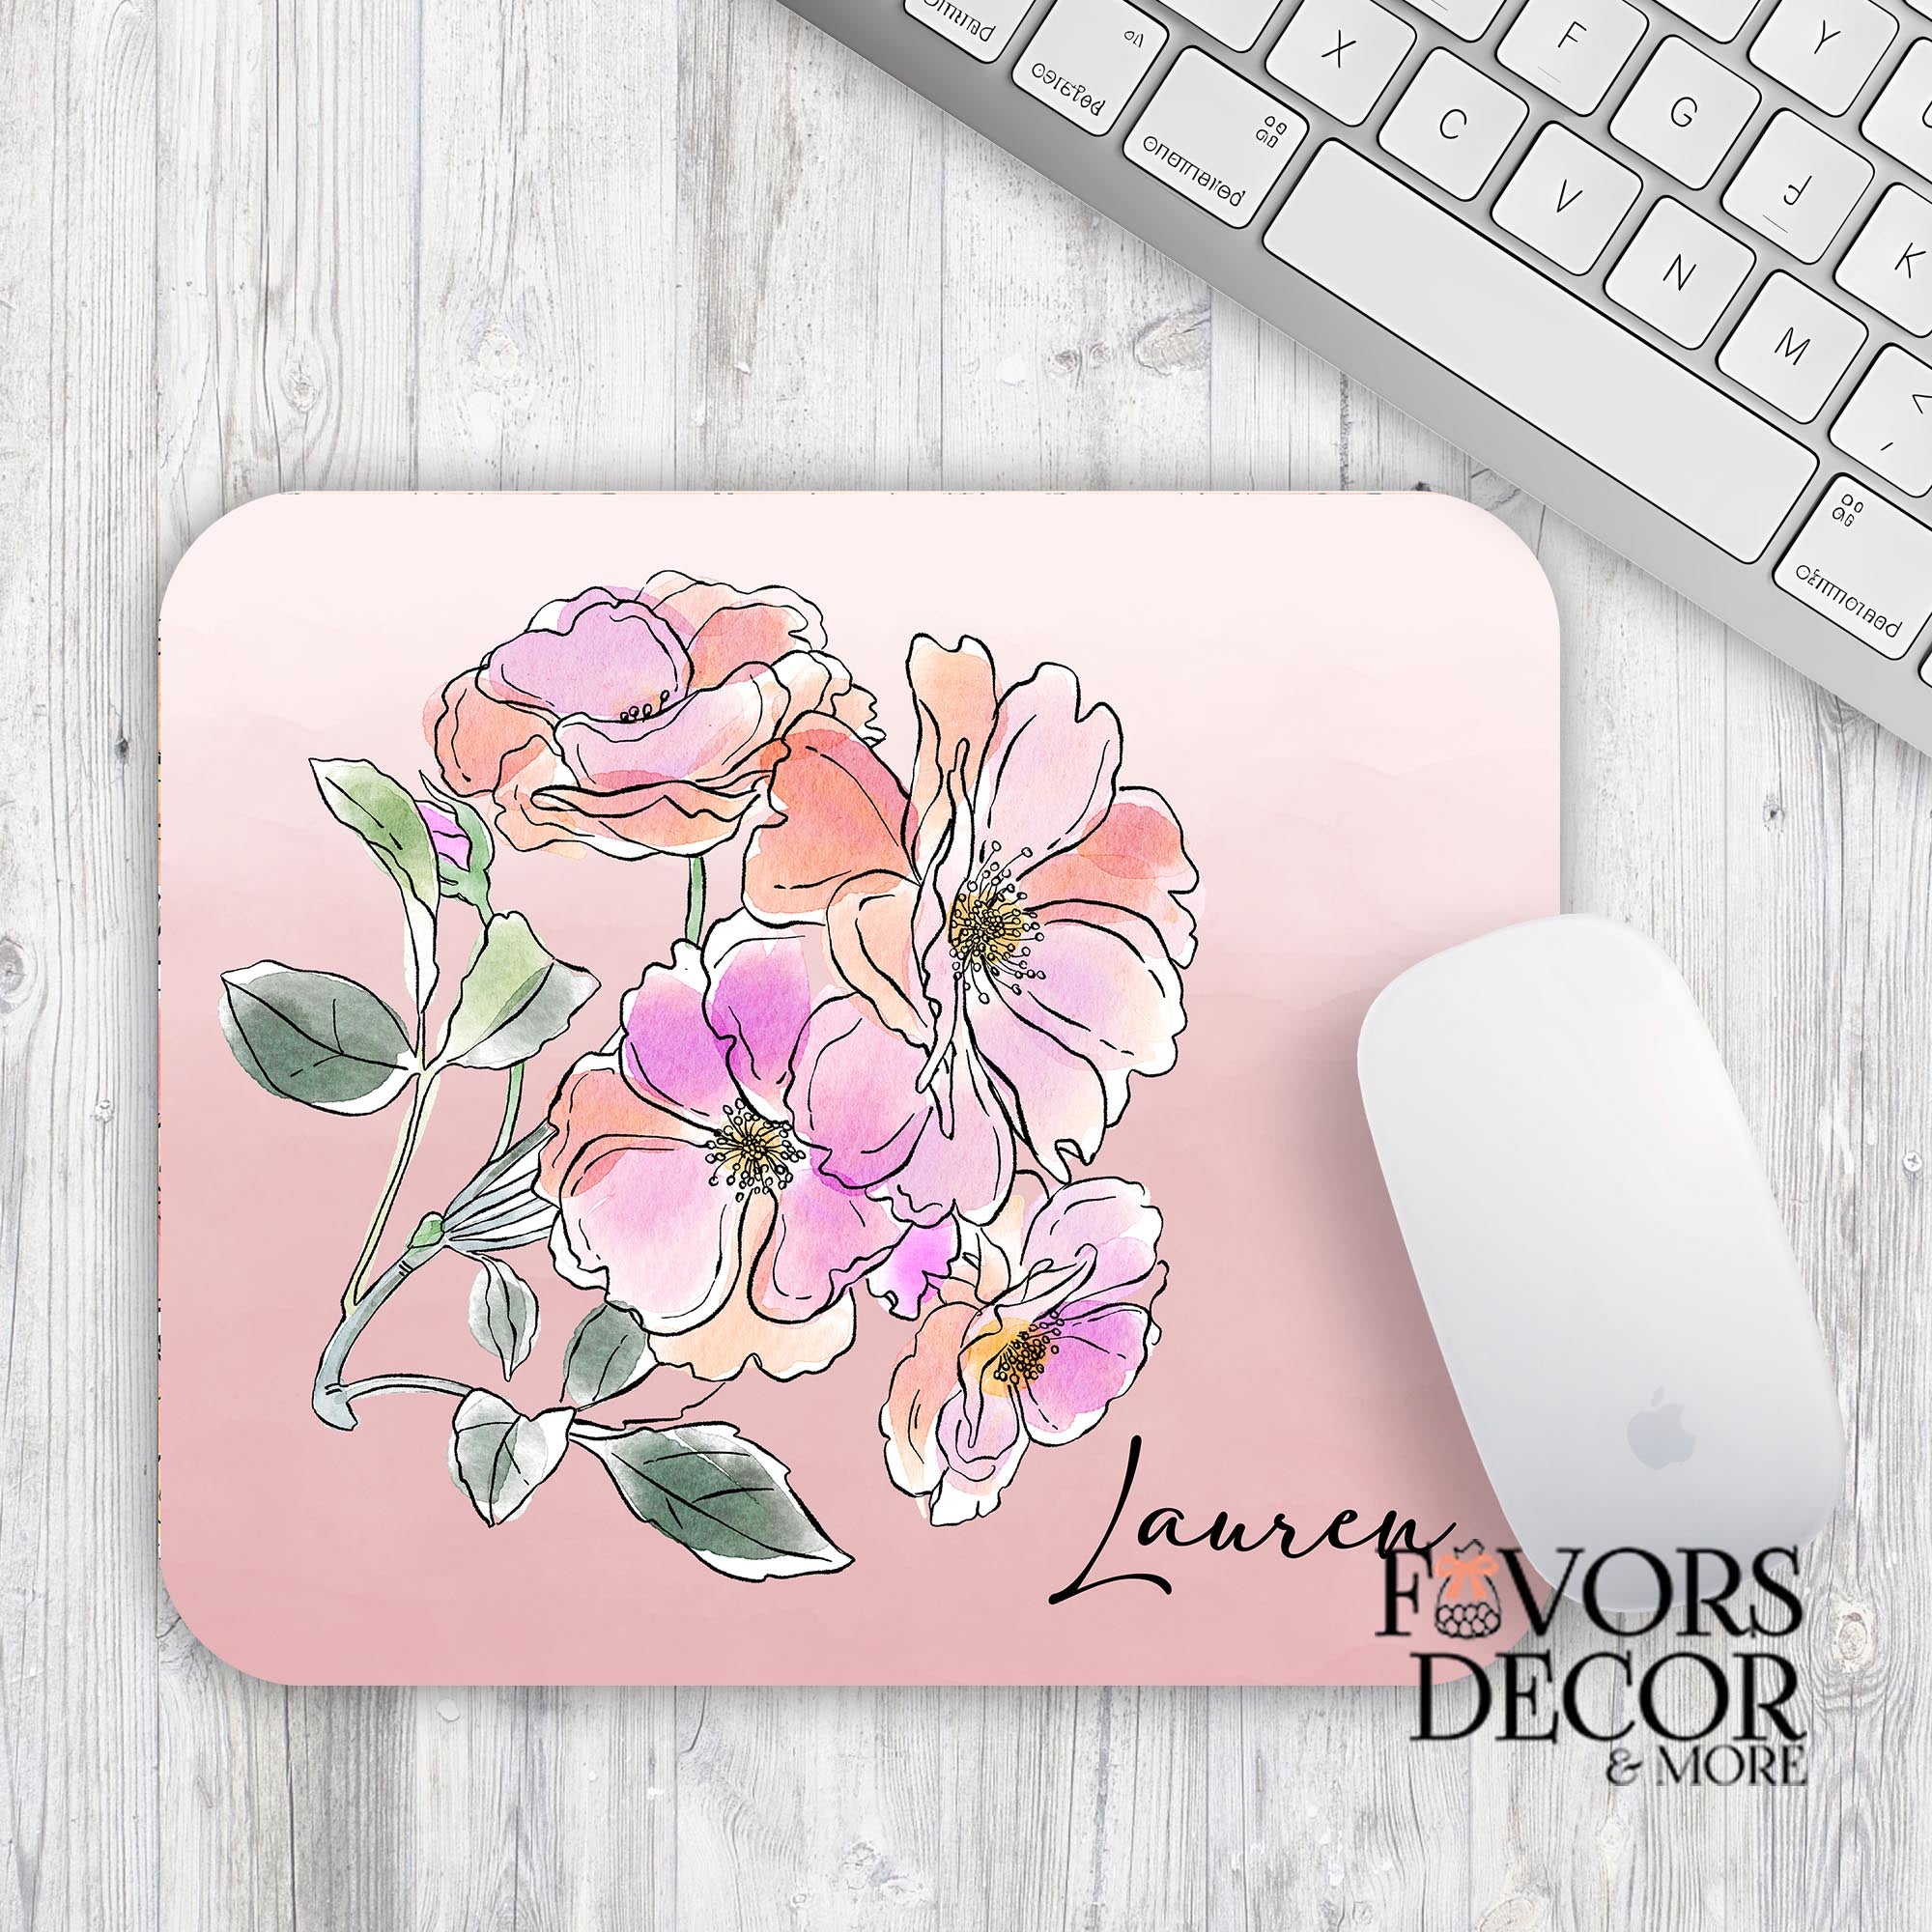 Custom Mouse Pad - Delicate Flowers